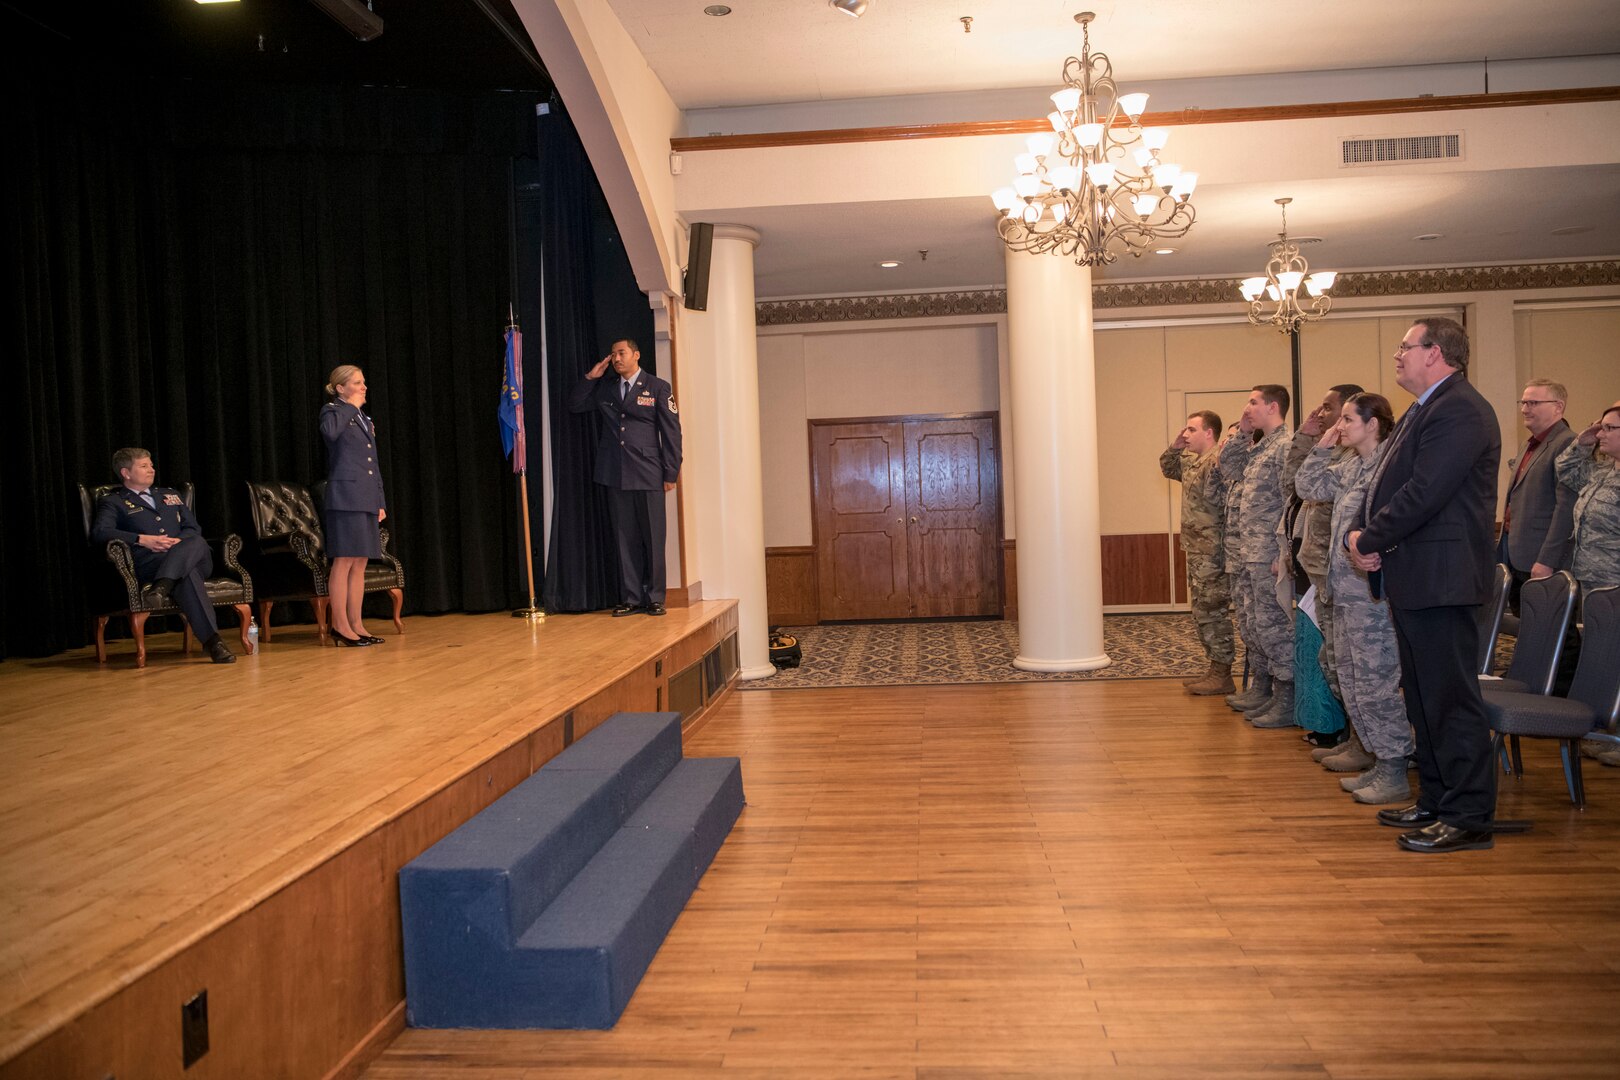 The men and women of the 1st Manpower Requirements Squadron rendered a final salute to their commander, Lt. Col. Jessica Corea, during the inactivation ceremony Jan. 9, 2020, at Joint Base San Antonio-Randolph, Texas. Through its existence, the squadron earned two Air Force Outstanding Unit awards and four Air Force organizational excellence awards.